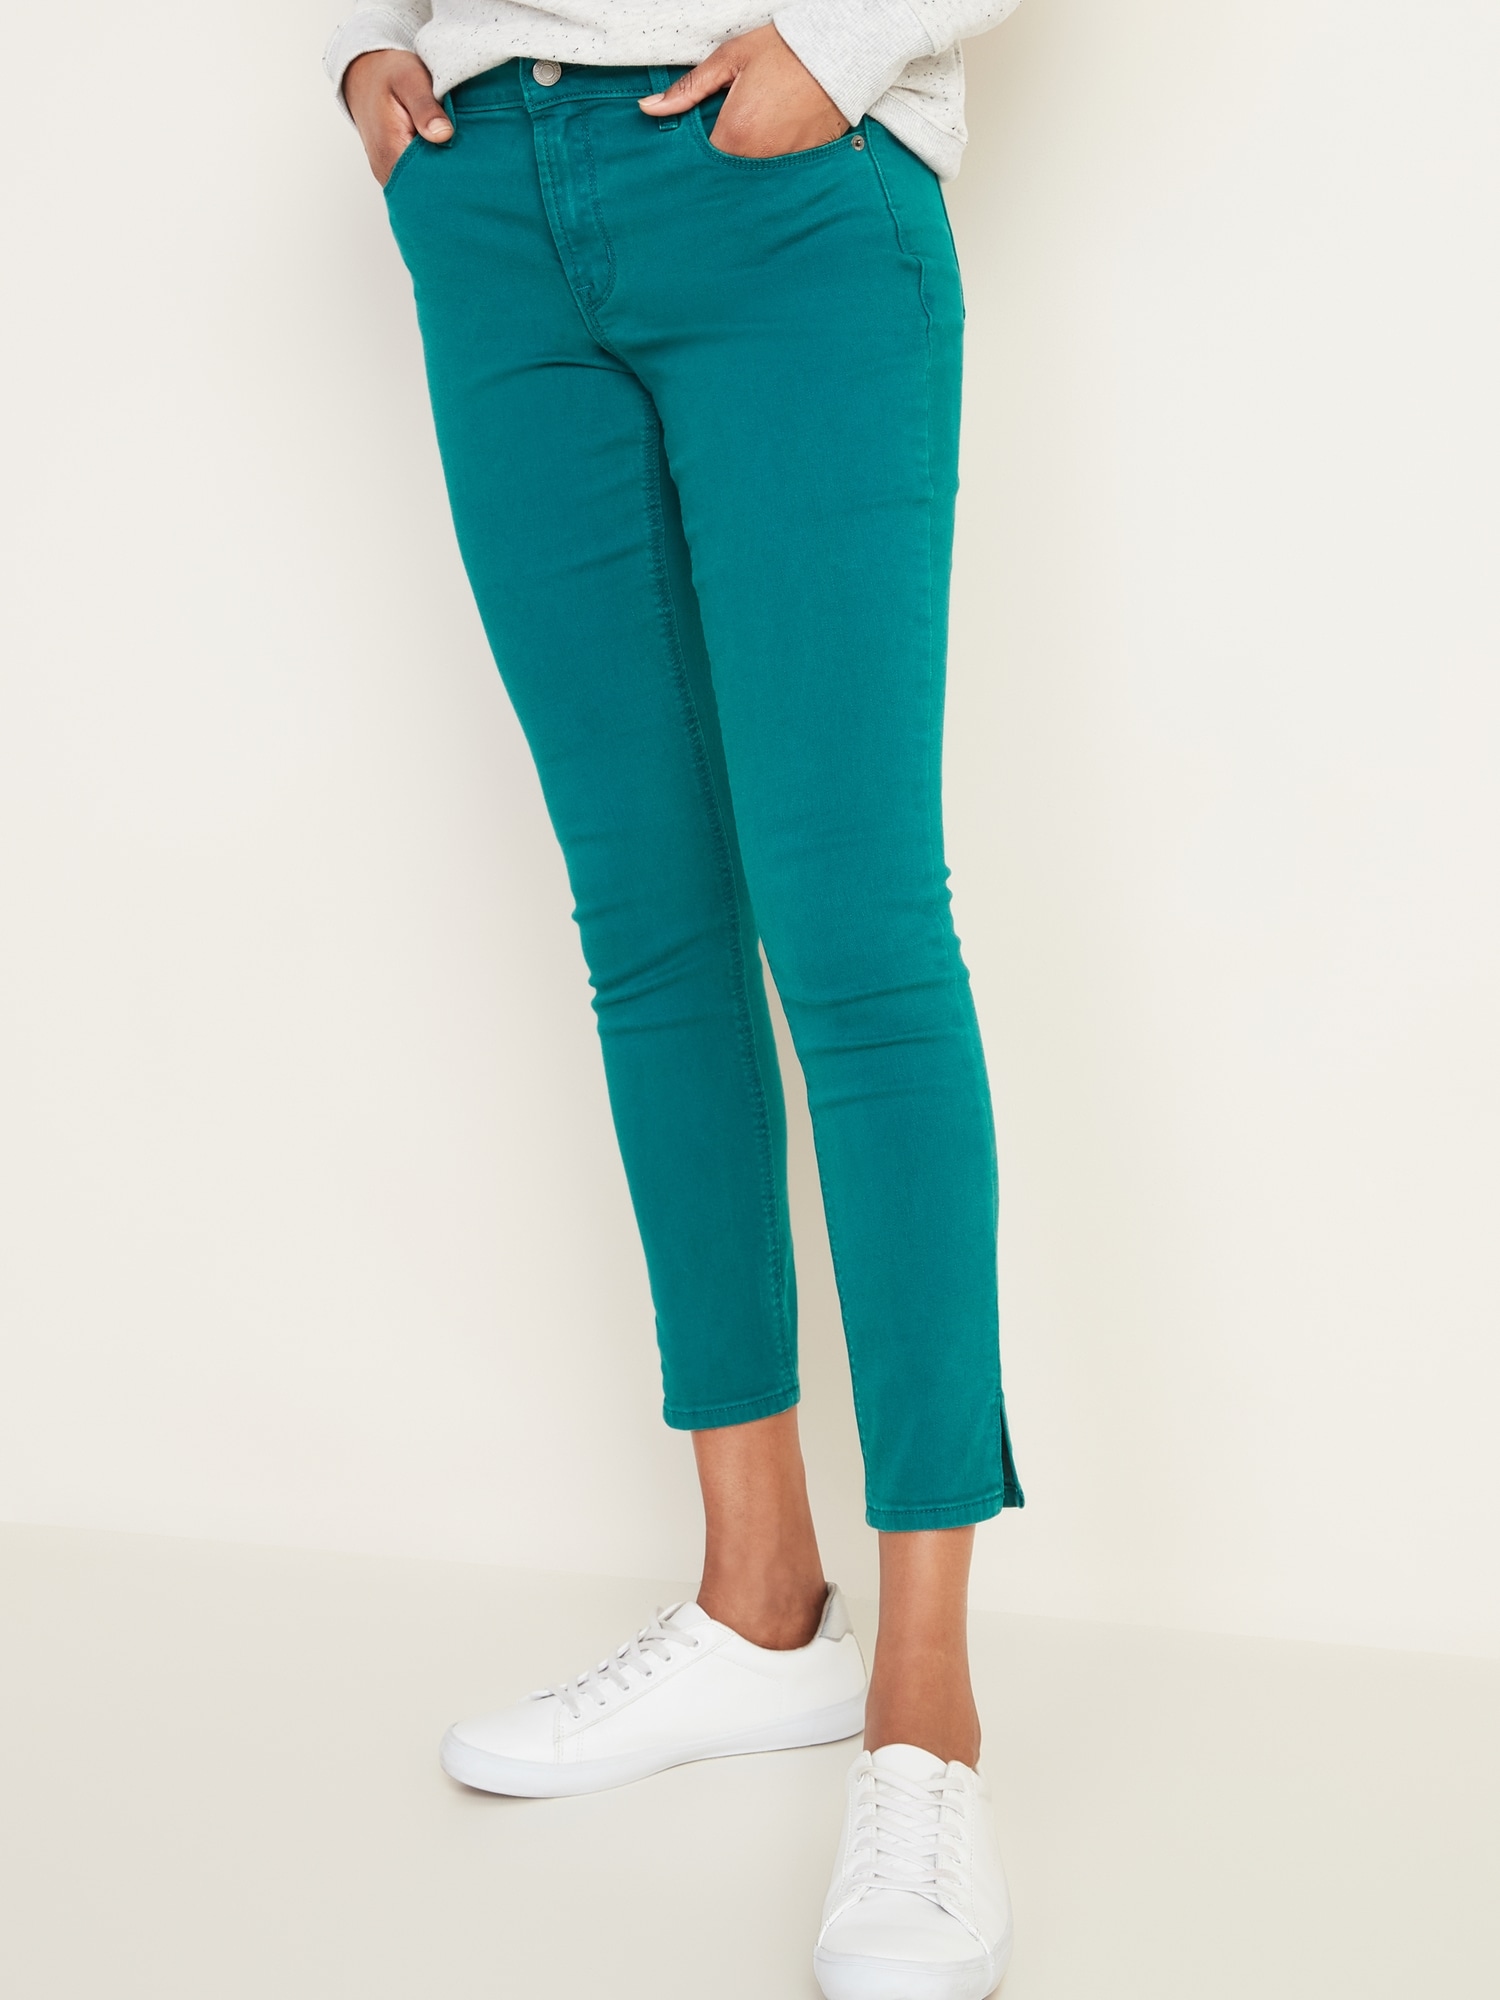 colored denim jeans womens